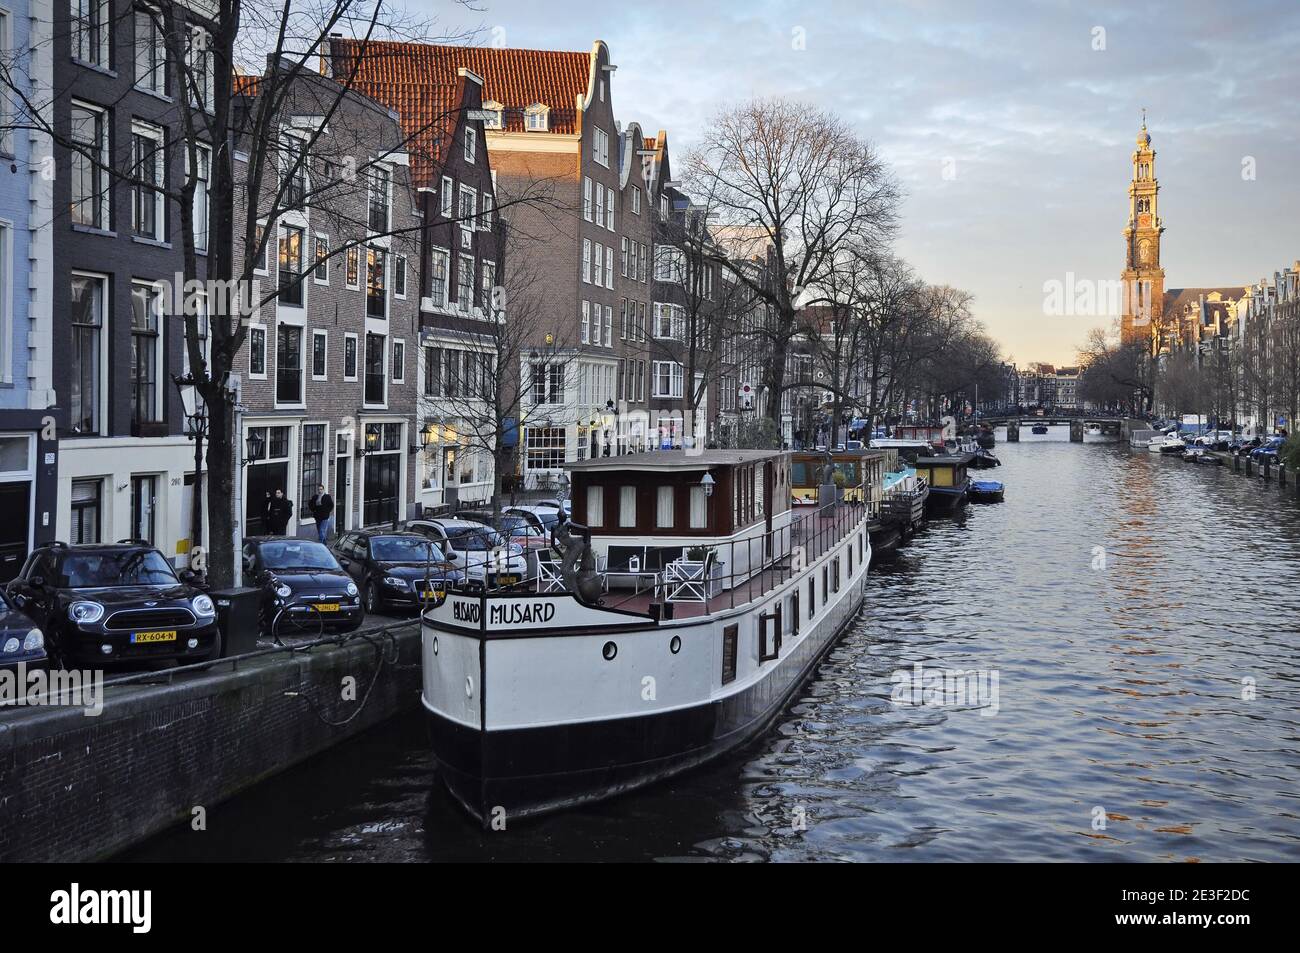 A white house boat named Musard is docked on the left side of the canal. The Westerkerk church is in the background, under the afternoon sunshine Stock Photo